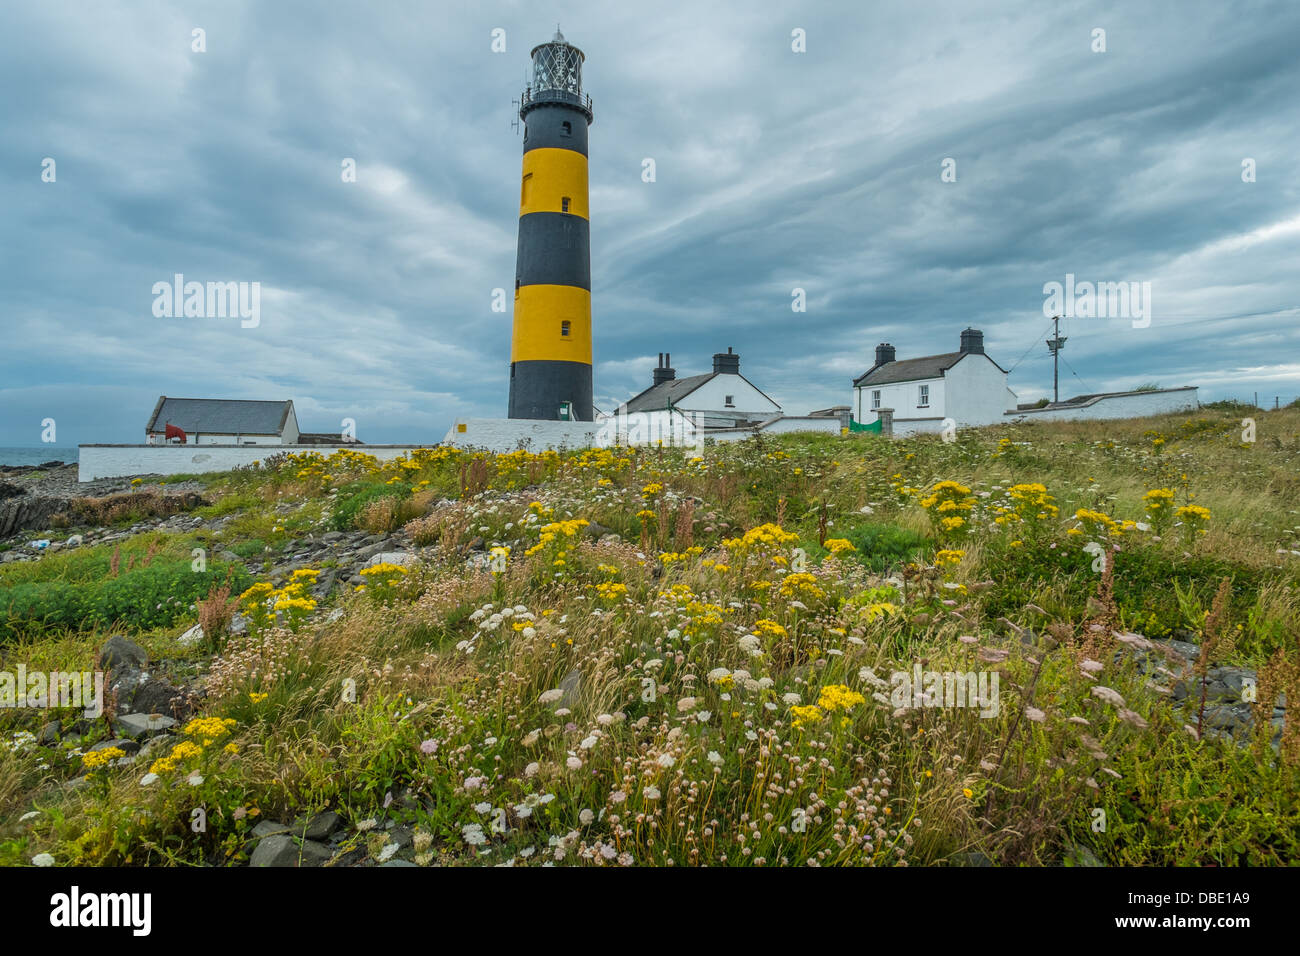 St John's Point Lighthouse in County Down Northern Ireland shown against stormy gray clouds with grassland and wild flowers in t Stock Photo